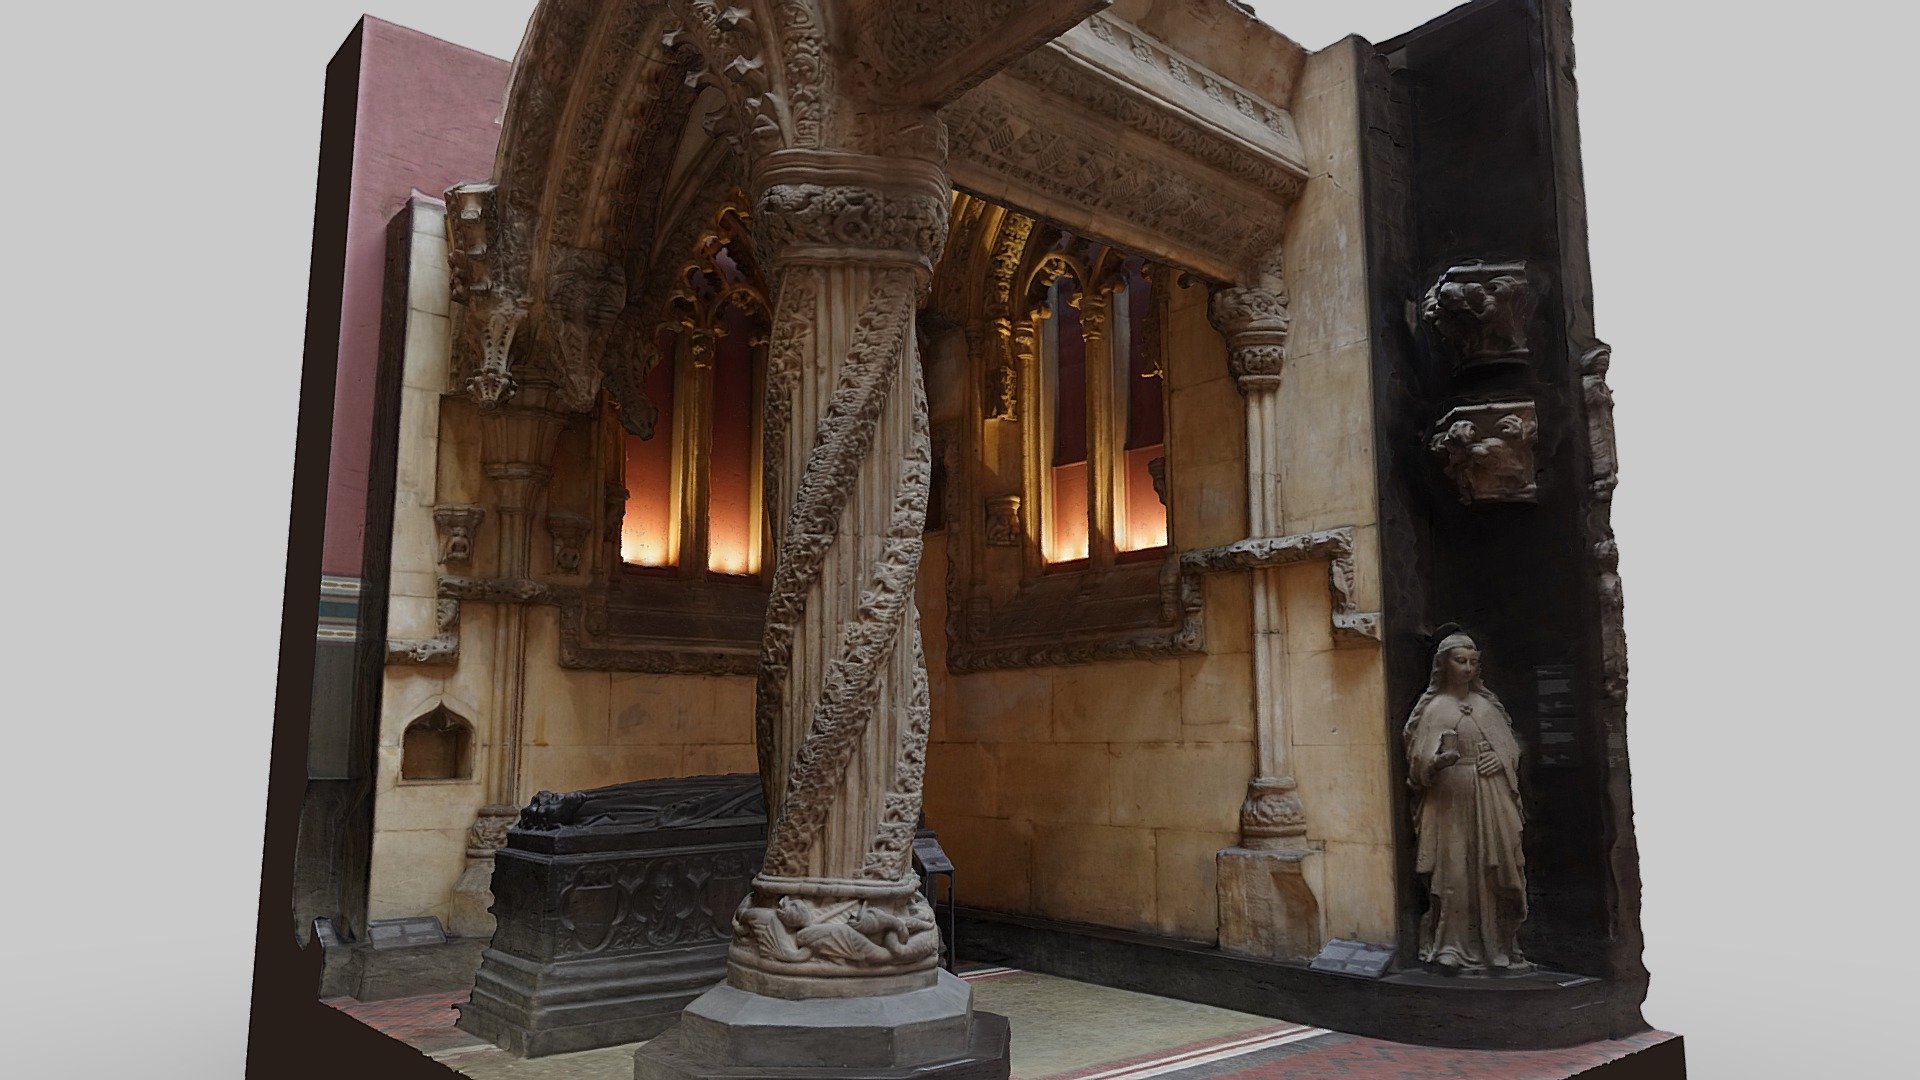 A cast of the walls and ceiling arches from a corner of Rosslyn Chapel in Scotland. Now located in Cast Courts (Room 46A), The Victoria and Albert Museum, London.

In the centre is a cast of the tomb effigy to Lady Fitzalan.

https://collections.vam.ac.uk/item/O128365/apprentice-or-prentice-pillar-architectural-cast-giovanni-franchi/

https://collections.vam.ac.uk/item/O41518/effigy-to-lady-fitzalan-tomb/

Photos taken in November 2022 with a Sony a7R III and processed in Reality Capture 3d model